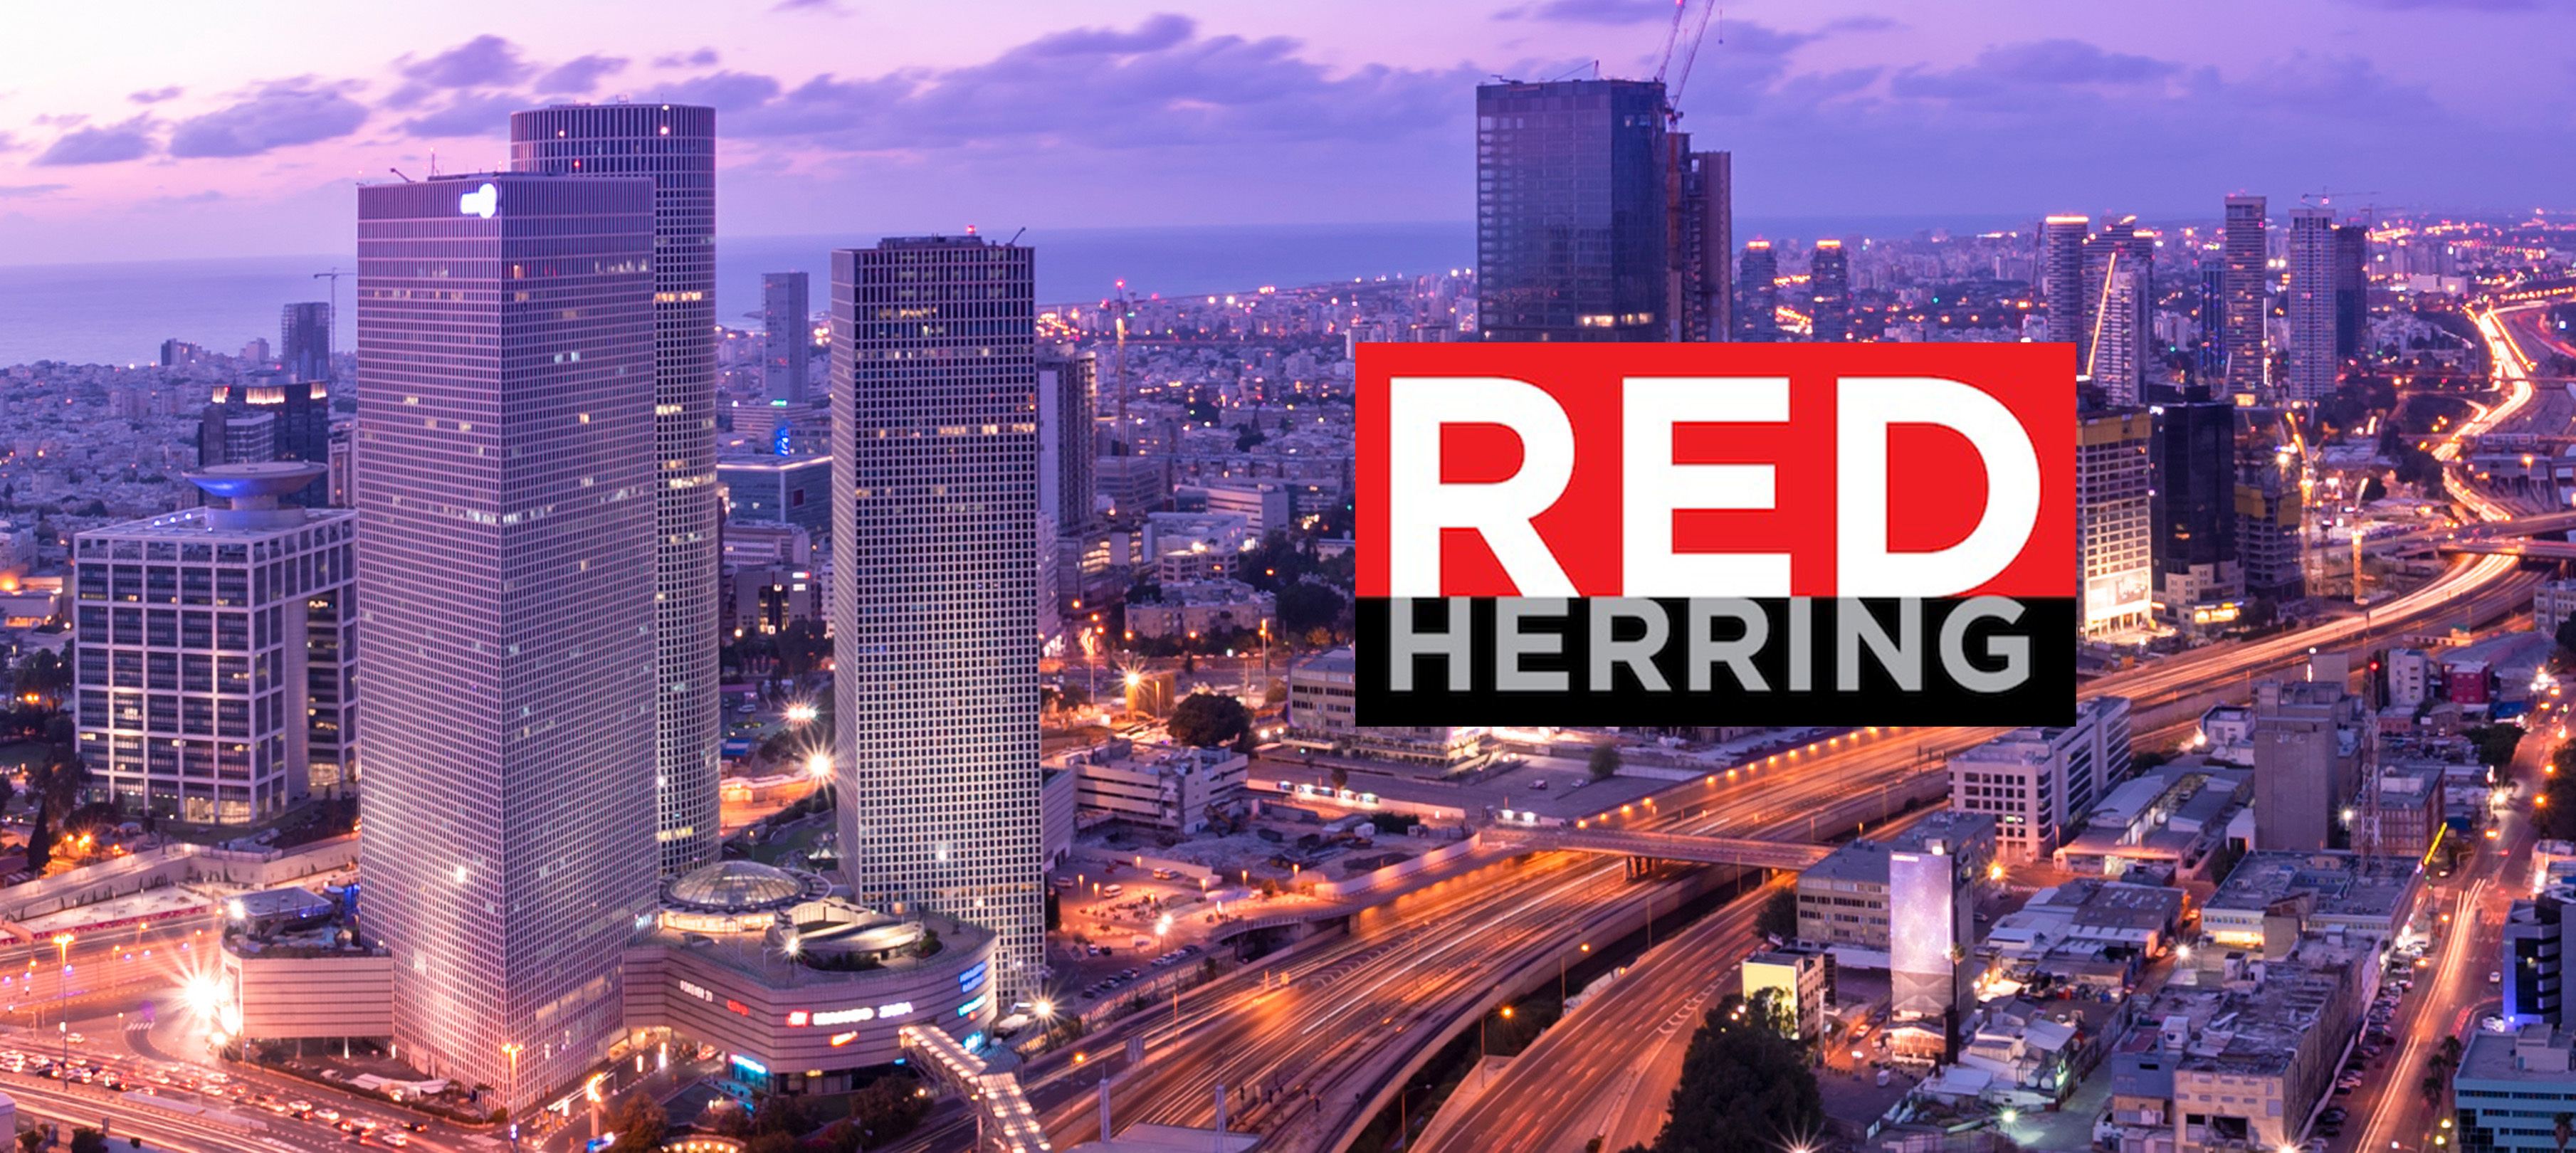 OurCrowd and 18 Israeli startups win 2016 Red Herring Awards